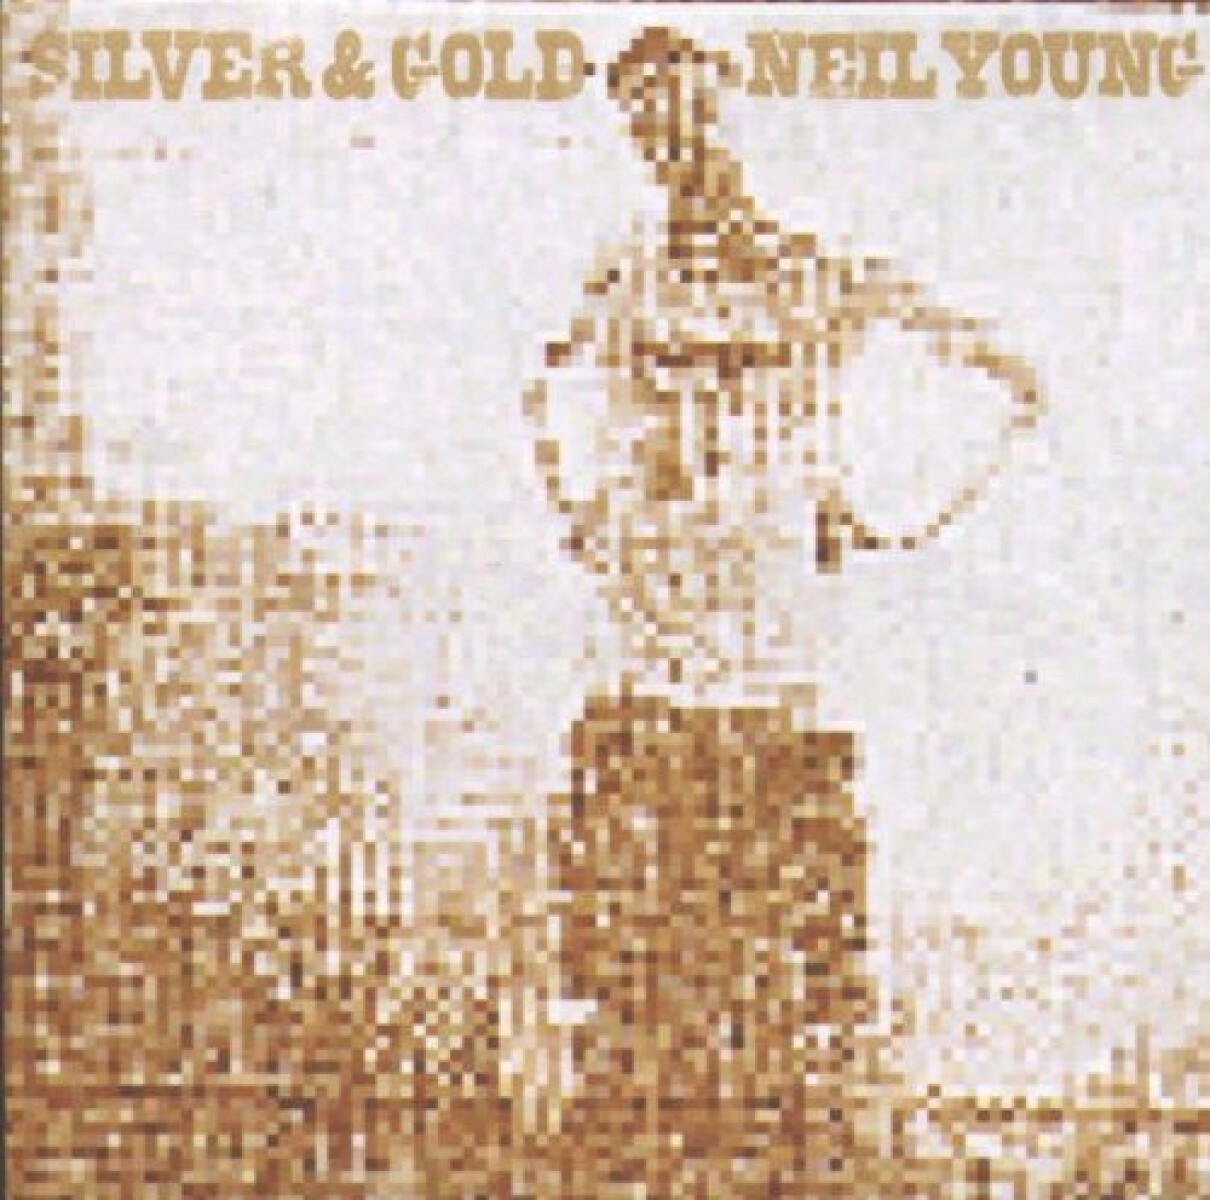 Young Neil-silver & Gold - Vinilo 